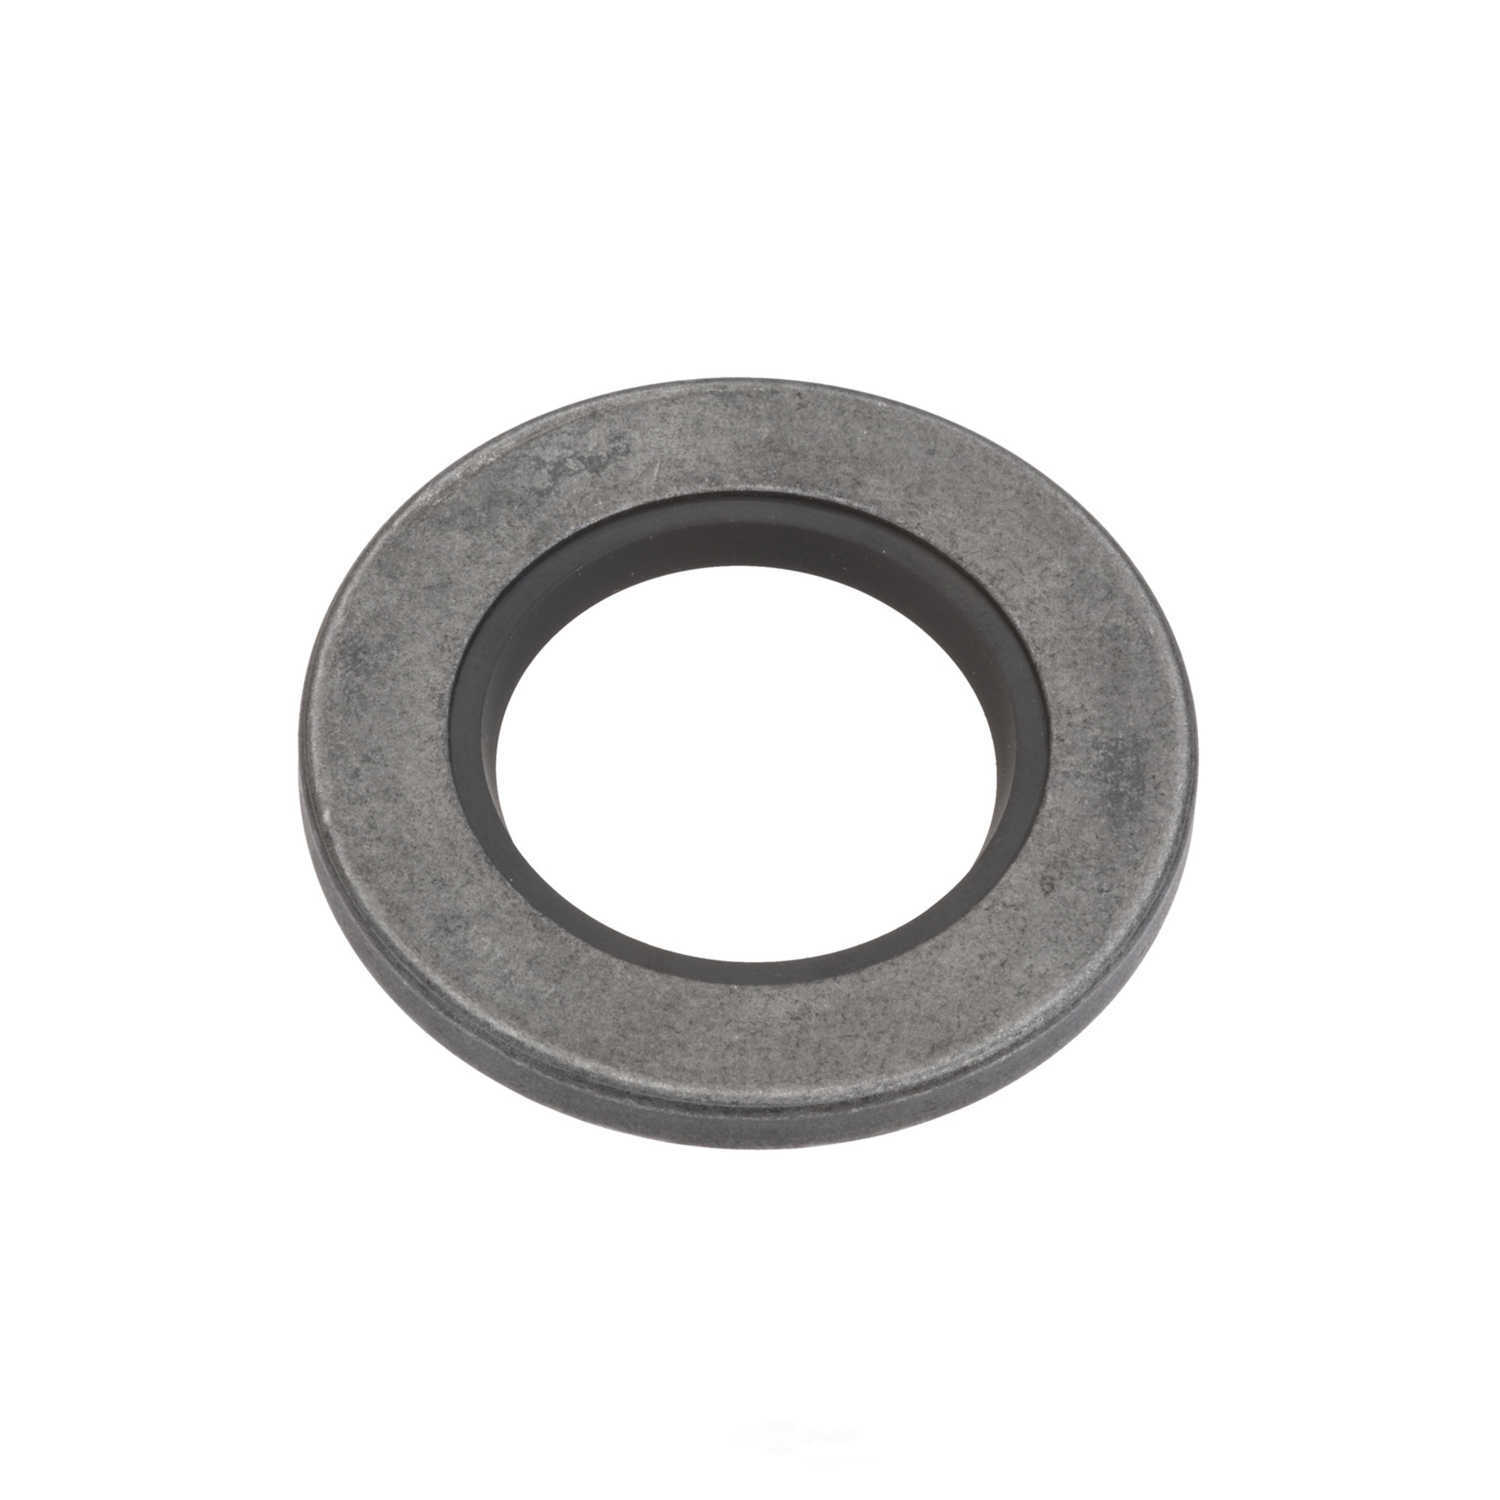 NATIONAL SEALS - Axle Spindle Seal - NAT 41461S